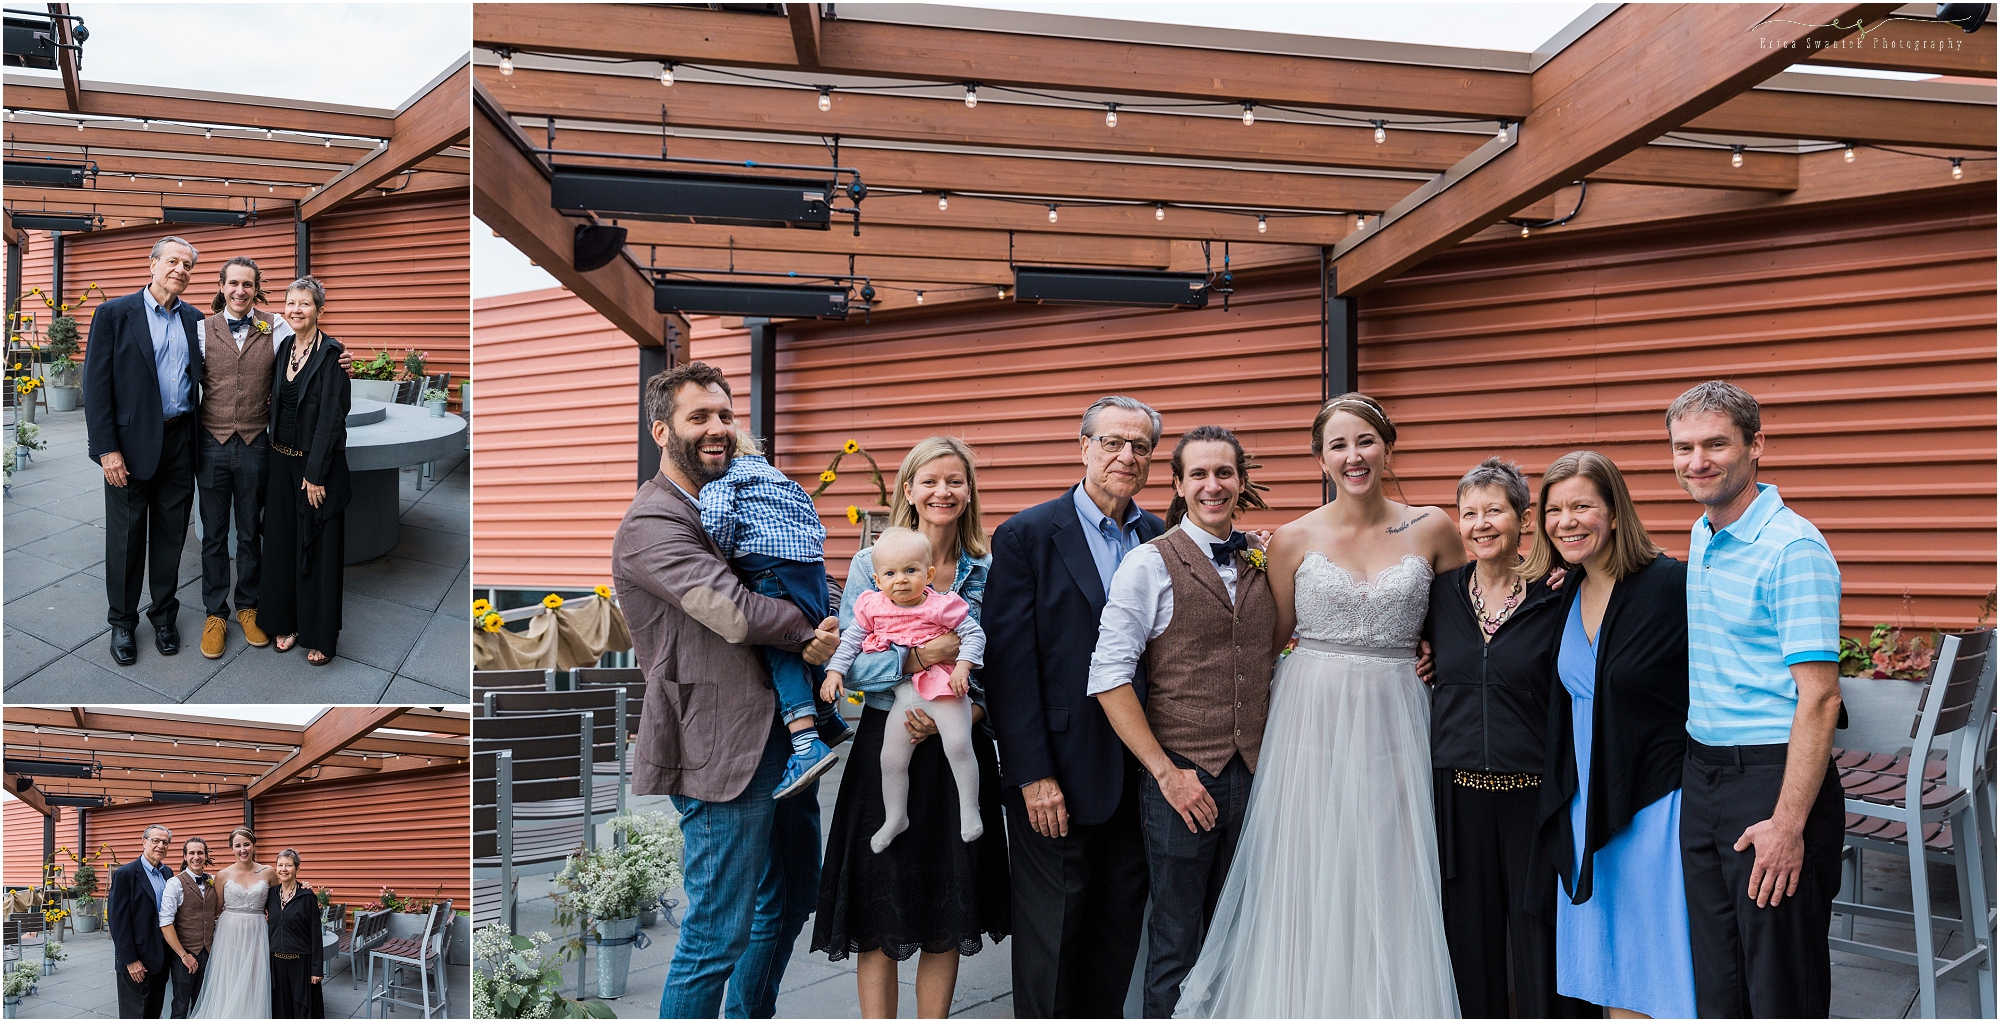 Family portraits after the ceremony at a Worthy Brewing Wedding in Bend Oregon. | Erica Swantek Photography